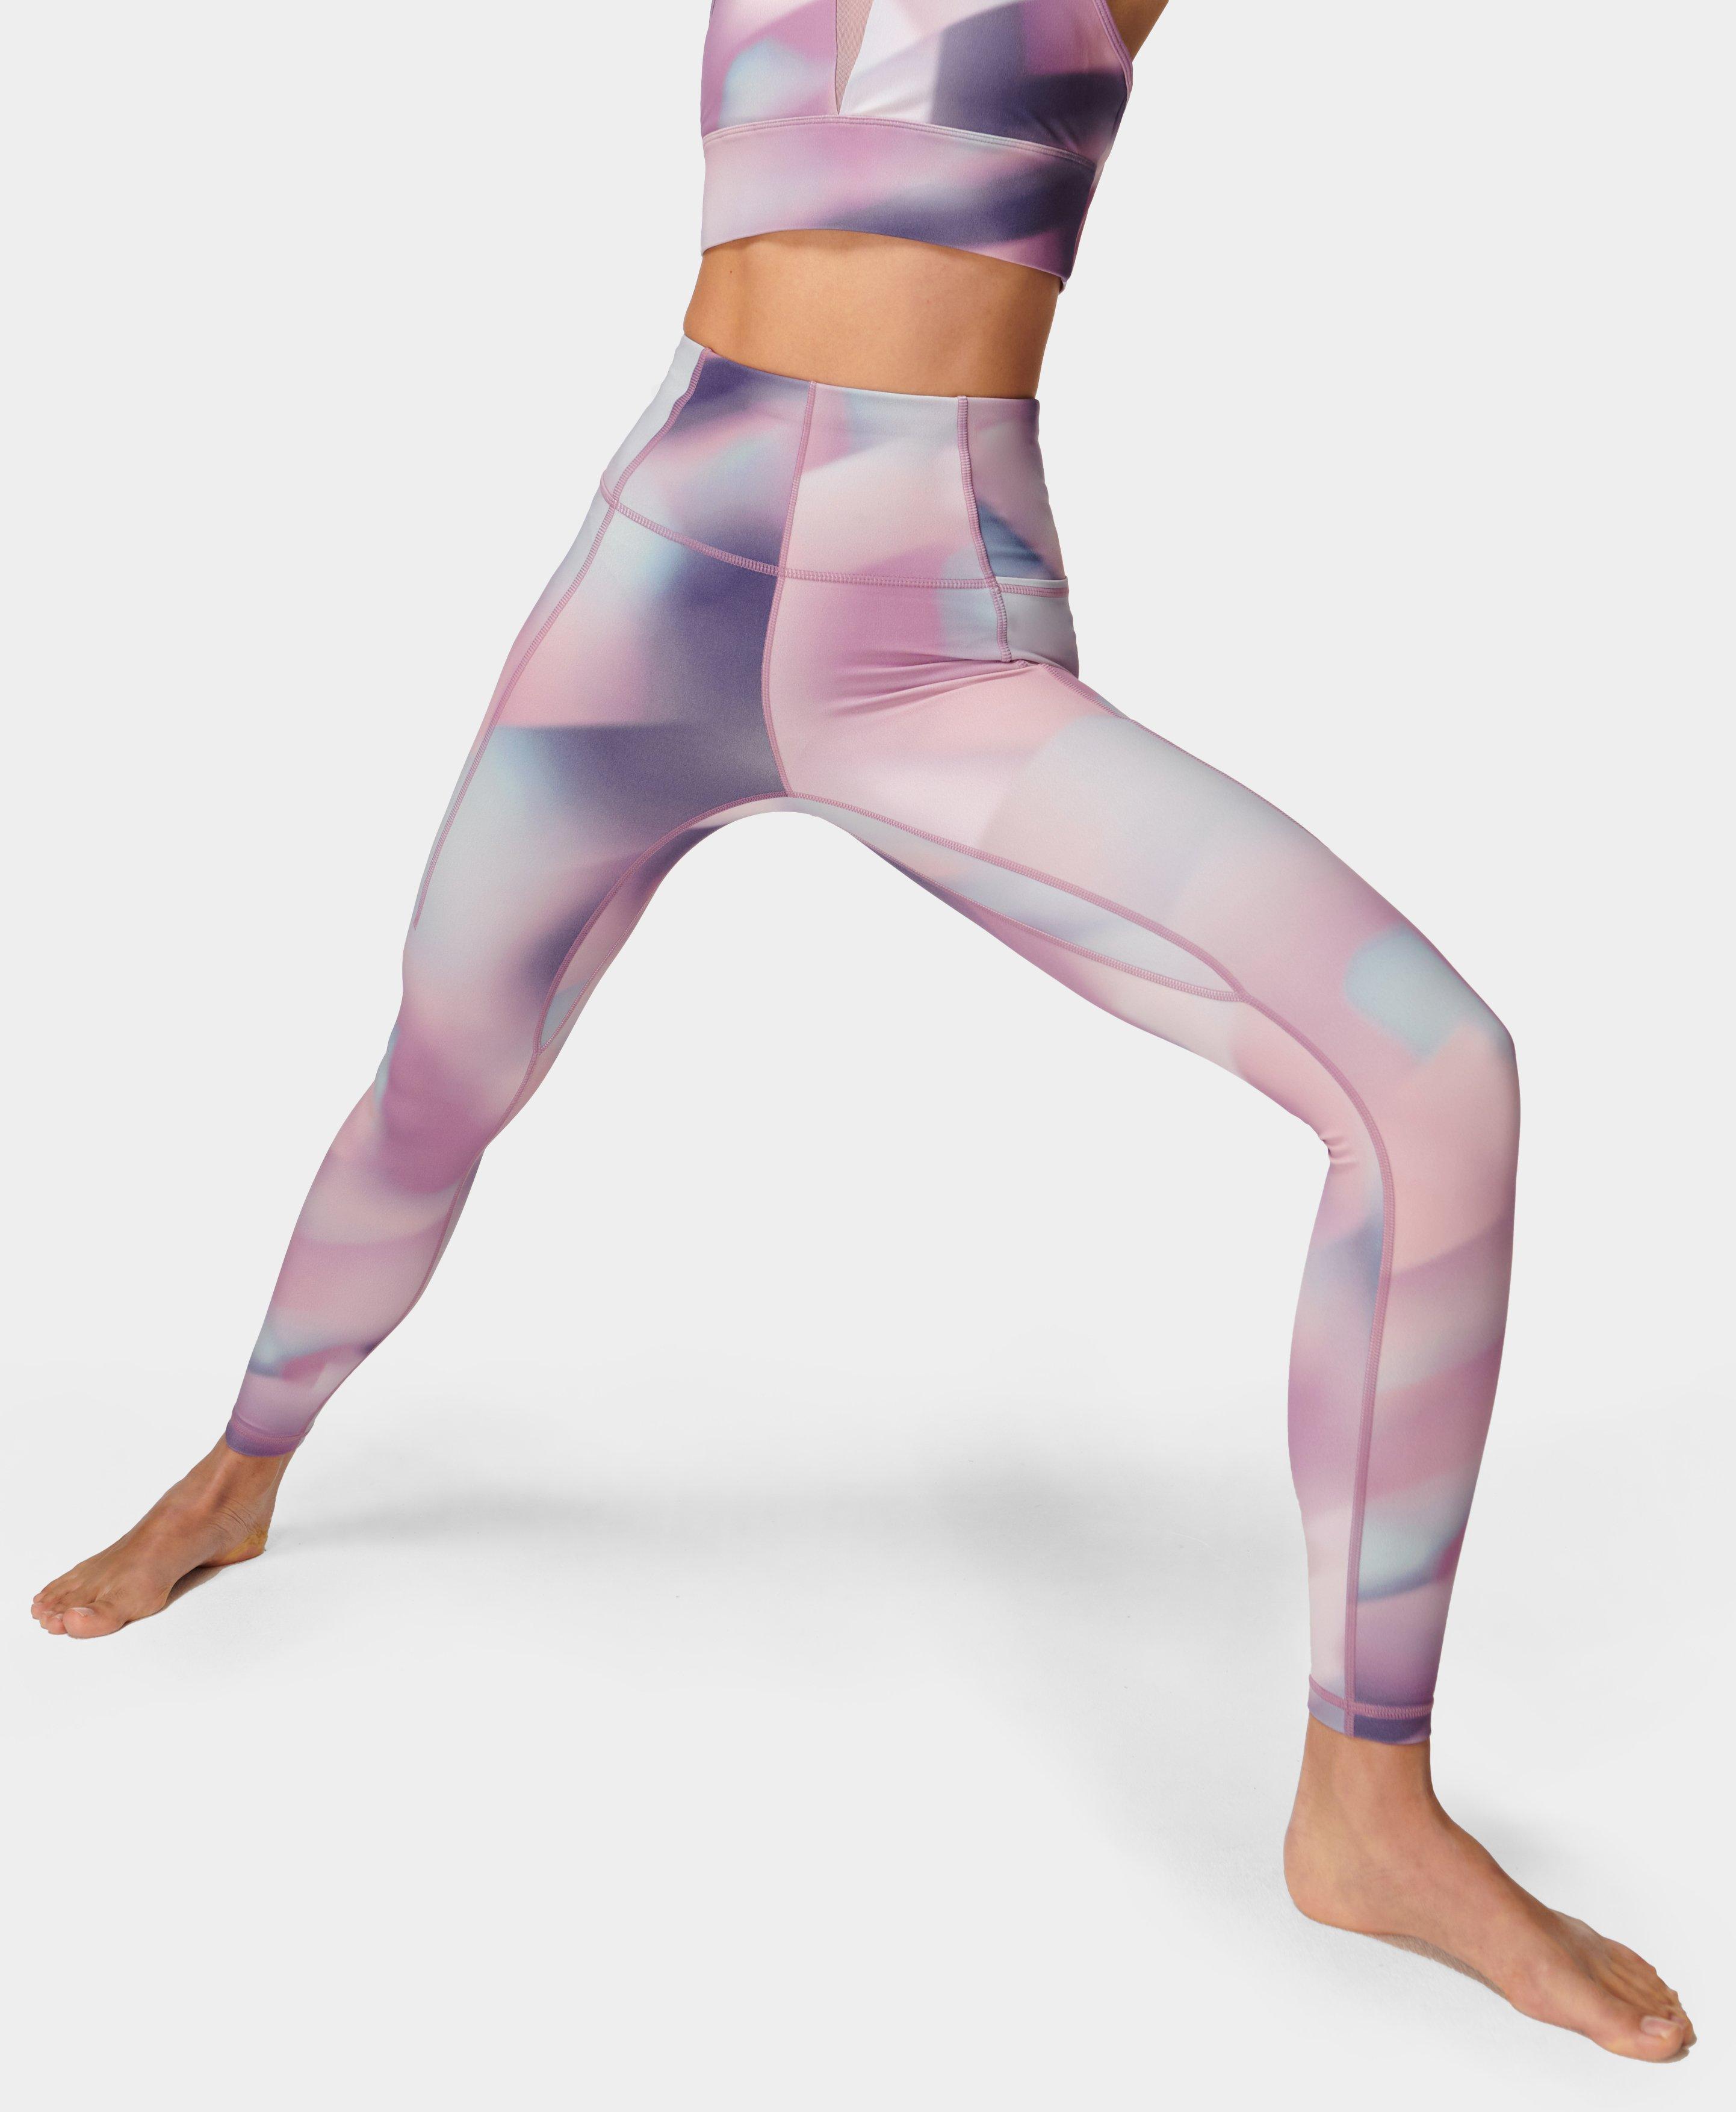 BUBBLELIME 26 INSEAM 3D Printed Yoga Pants Moisture Wicking Printed Running  P EUR 40,97 - PicClick FR